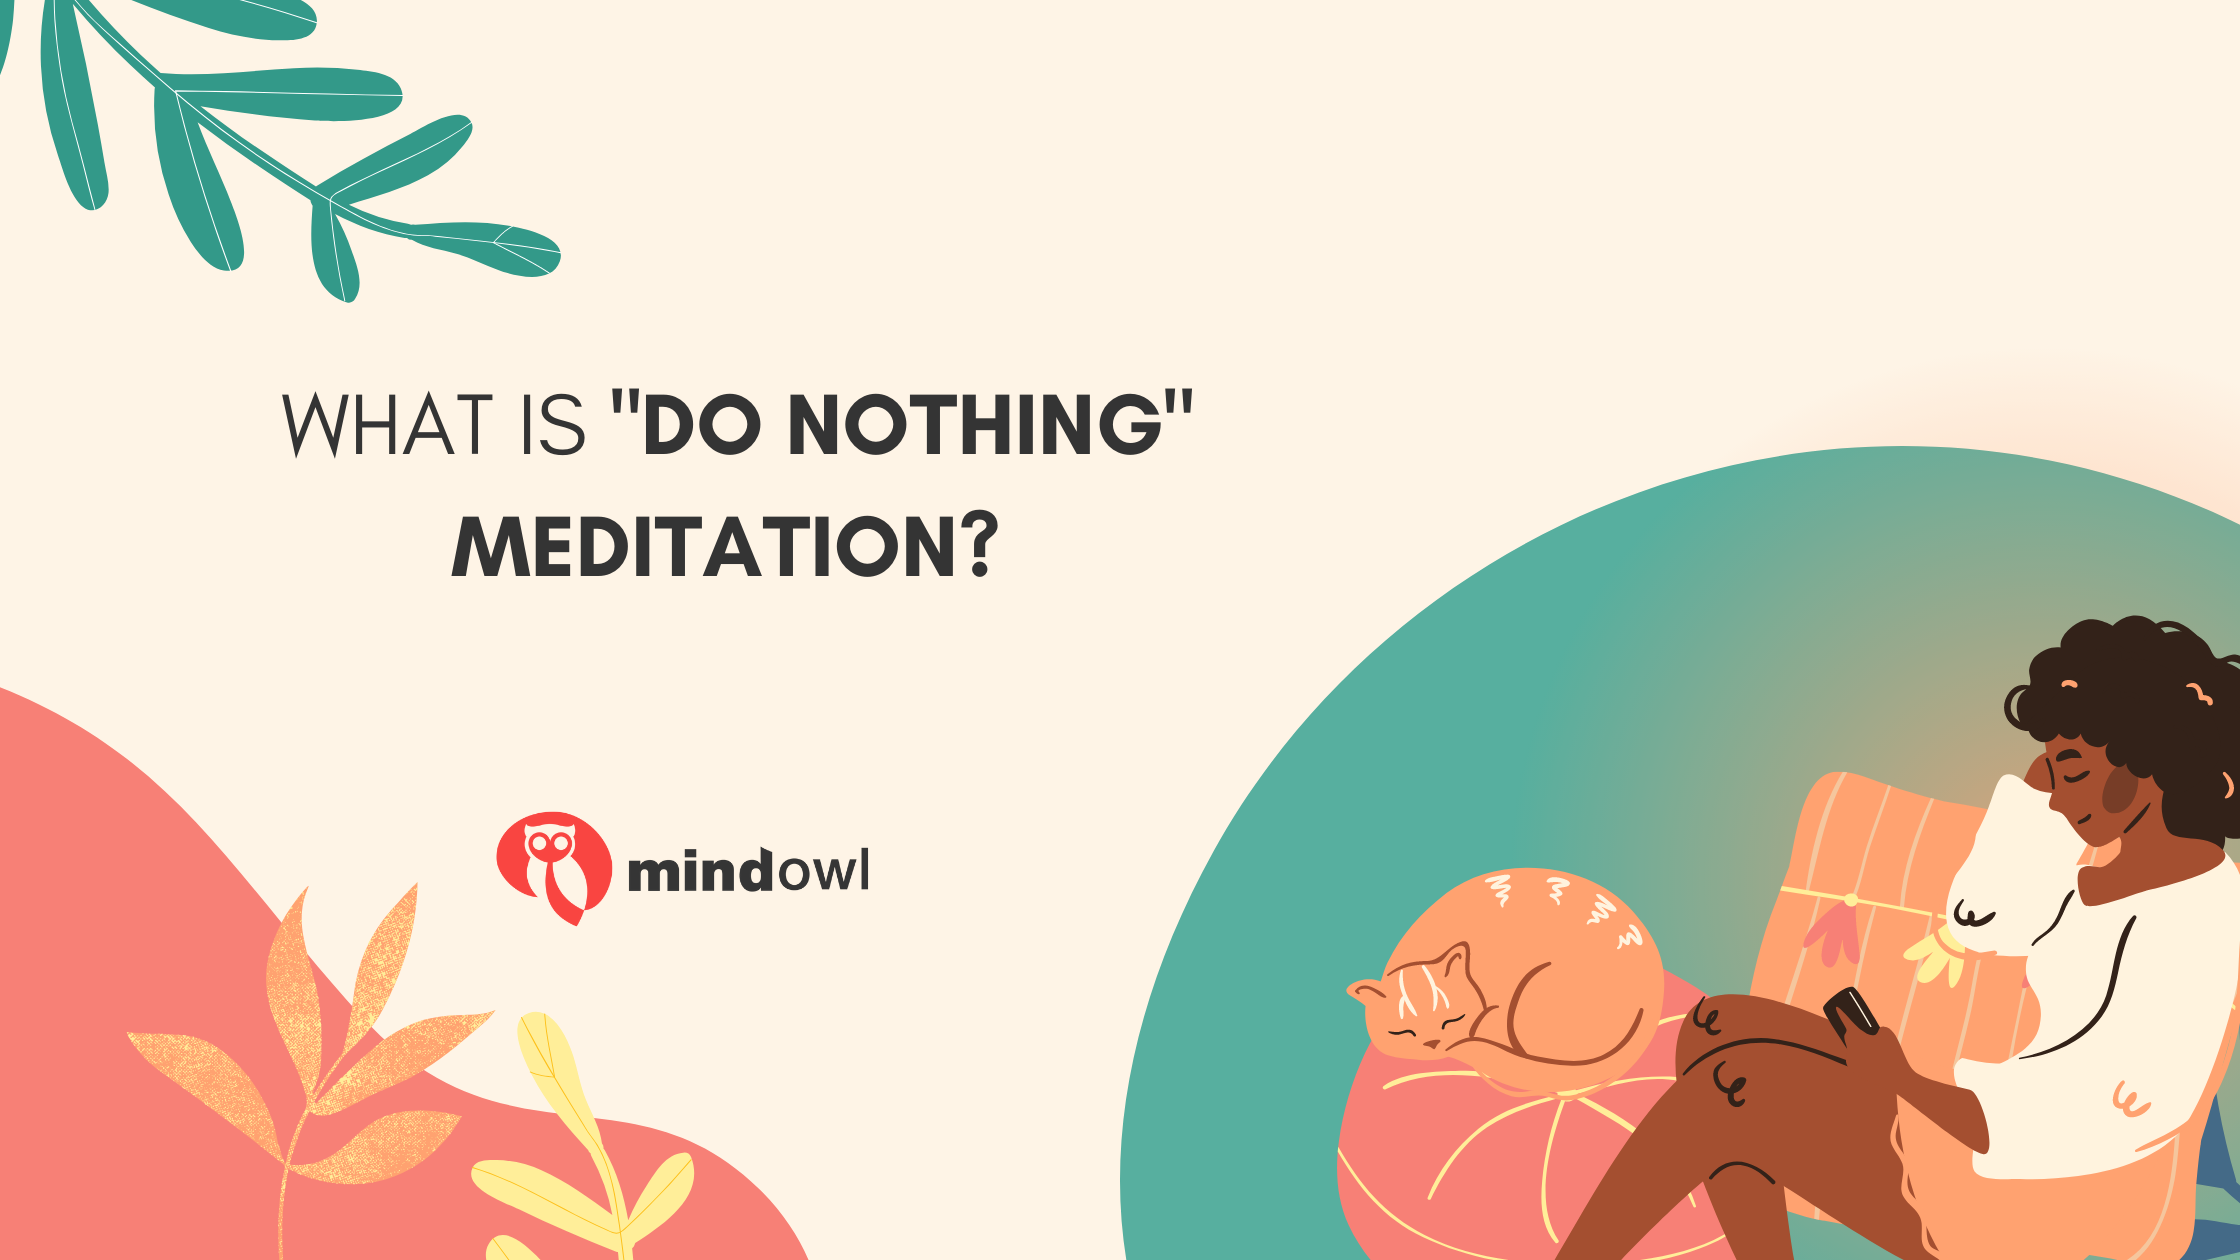 What is “do nothing” meditation?